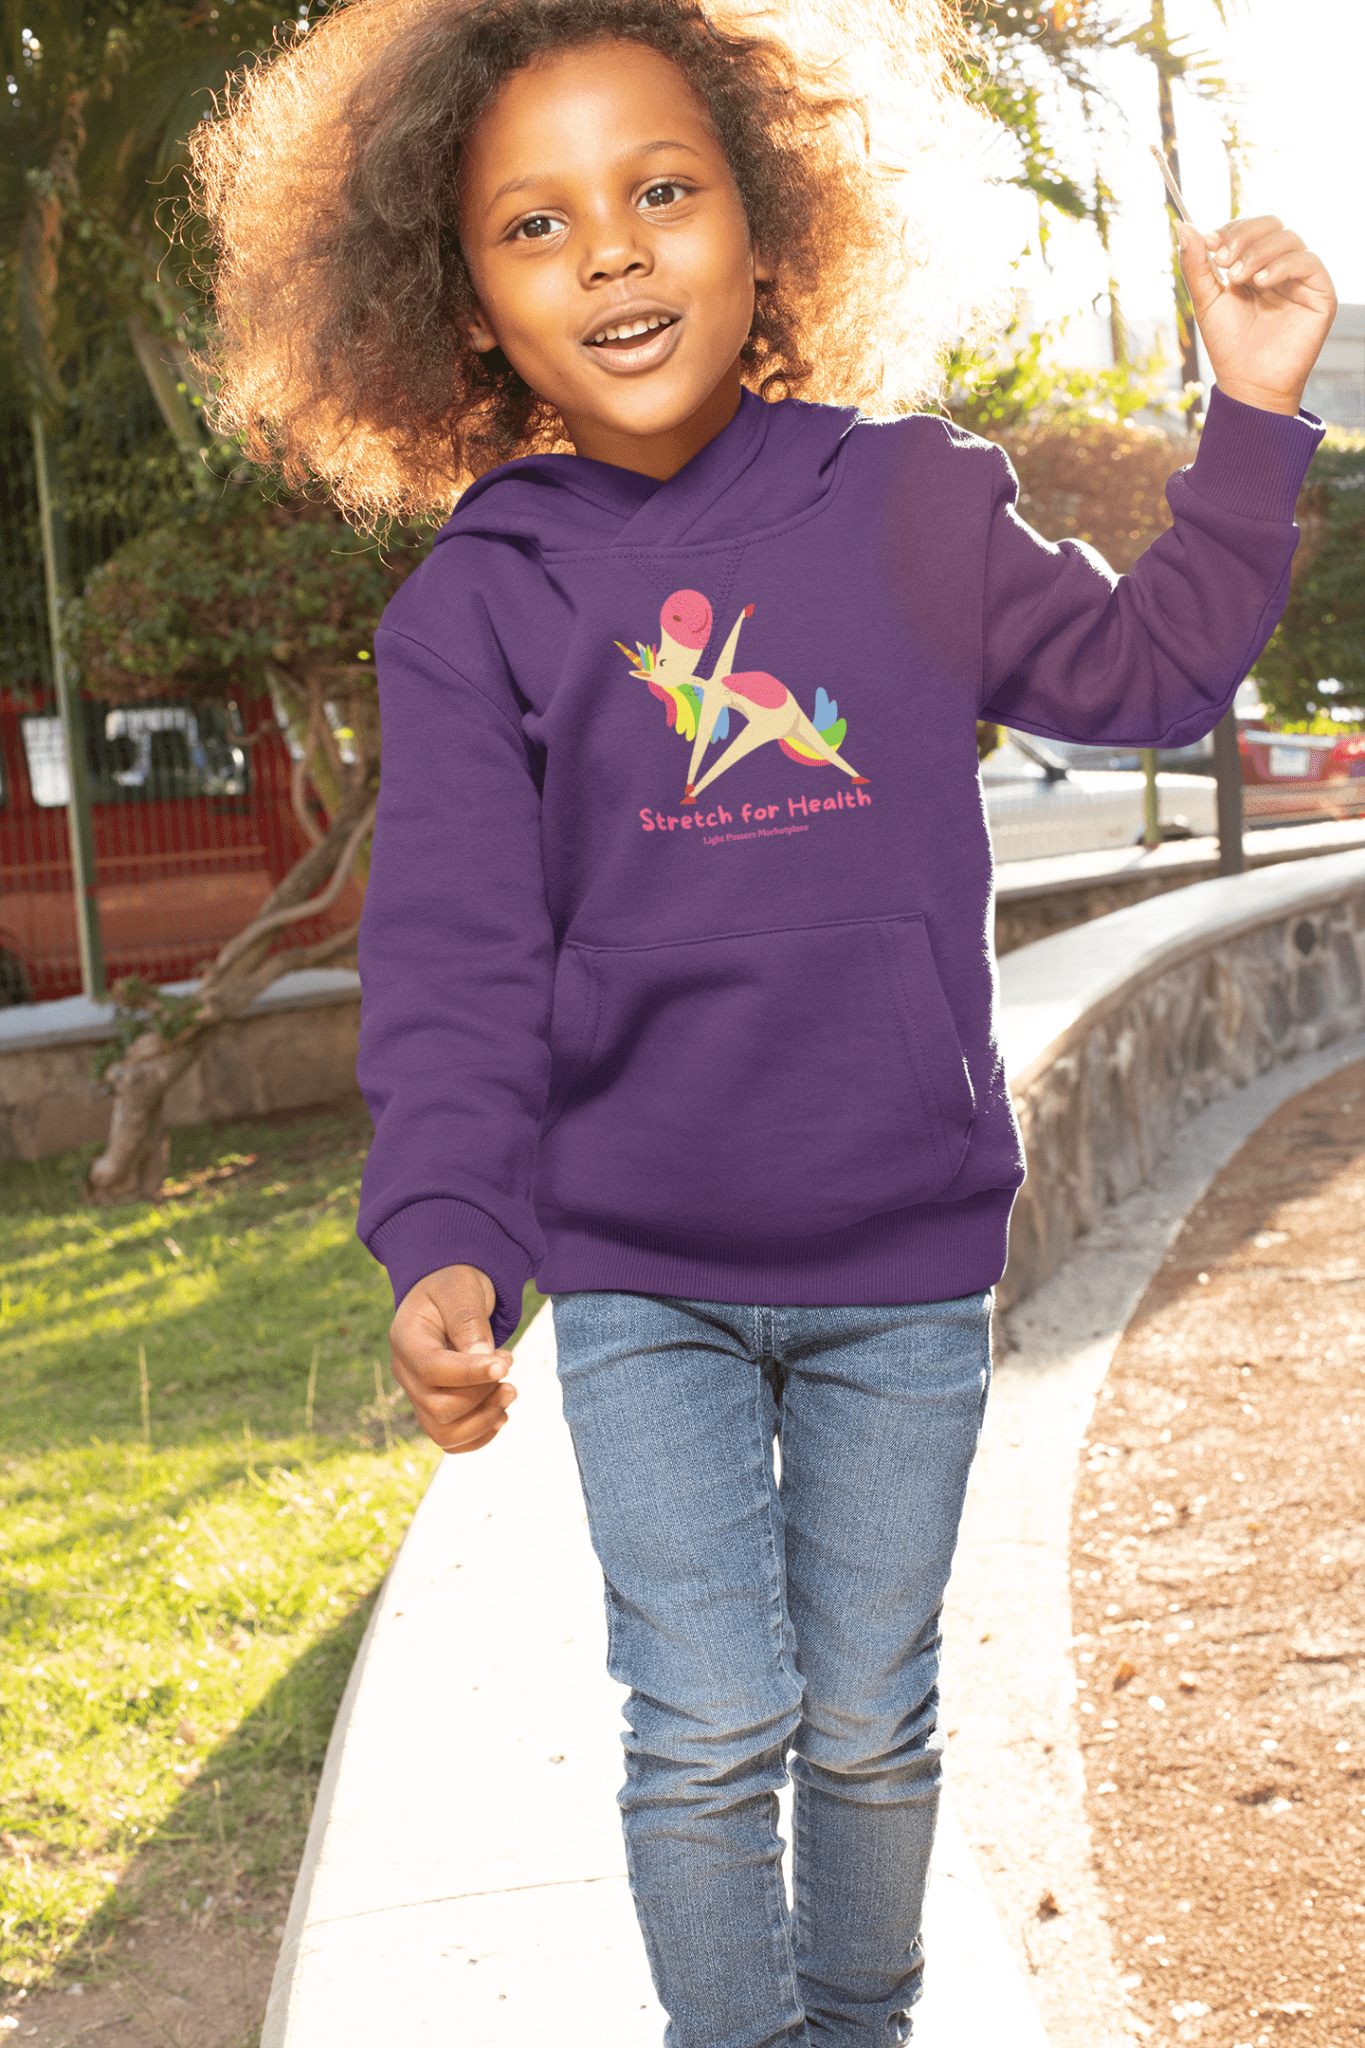 A toddler hoodie with a unicorn design, featuring a jersey-lined hood, cover-stitched details, and side-seam pockets for durability and comfort.